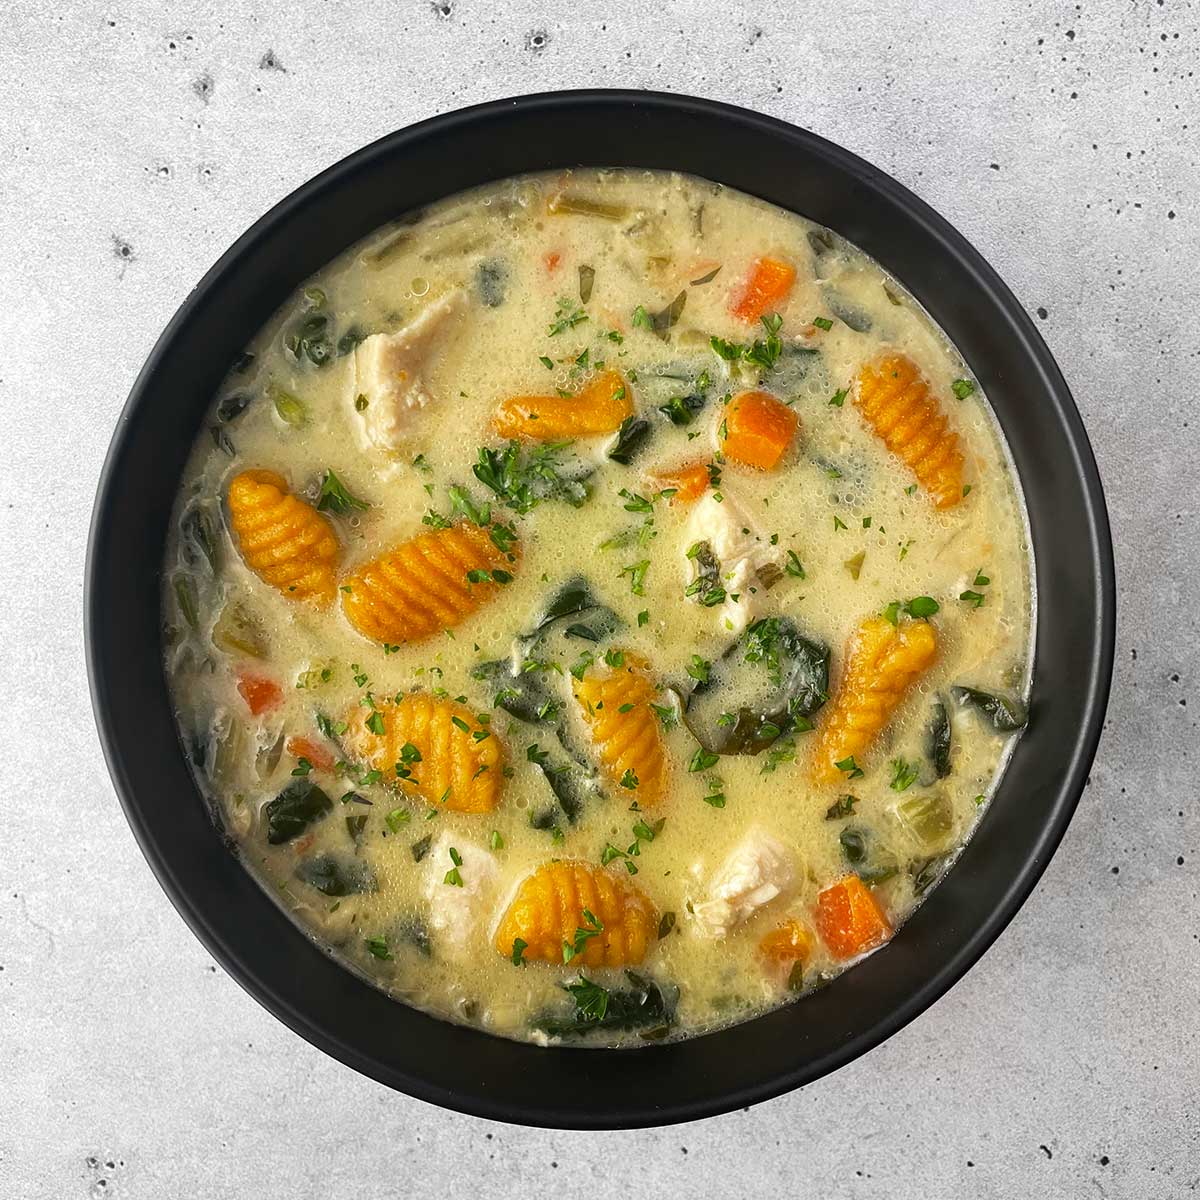 Soups On! 5-Meal Kit